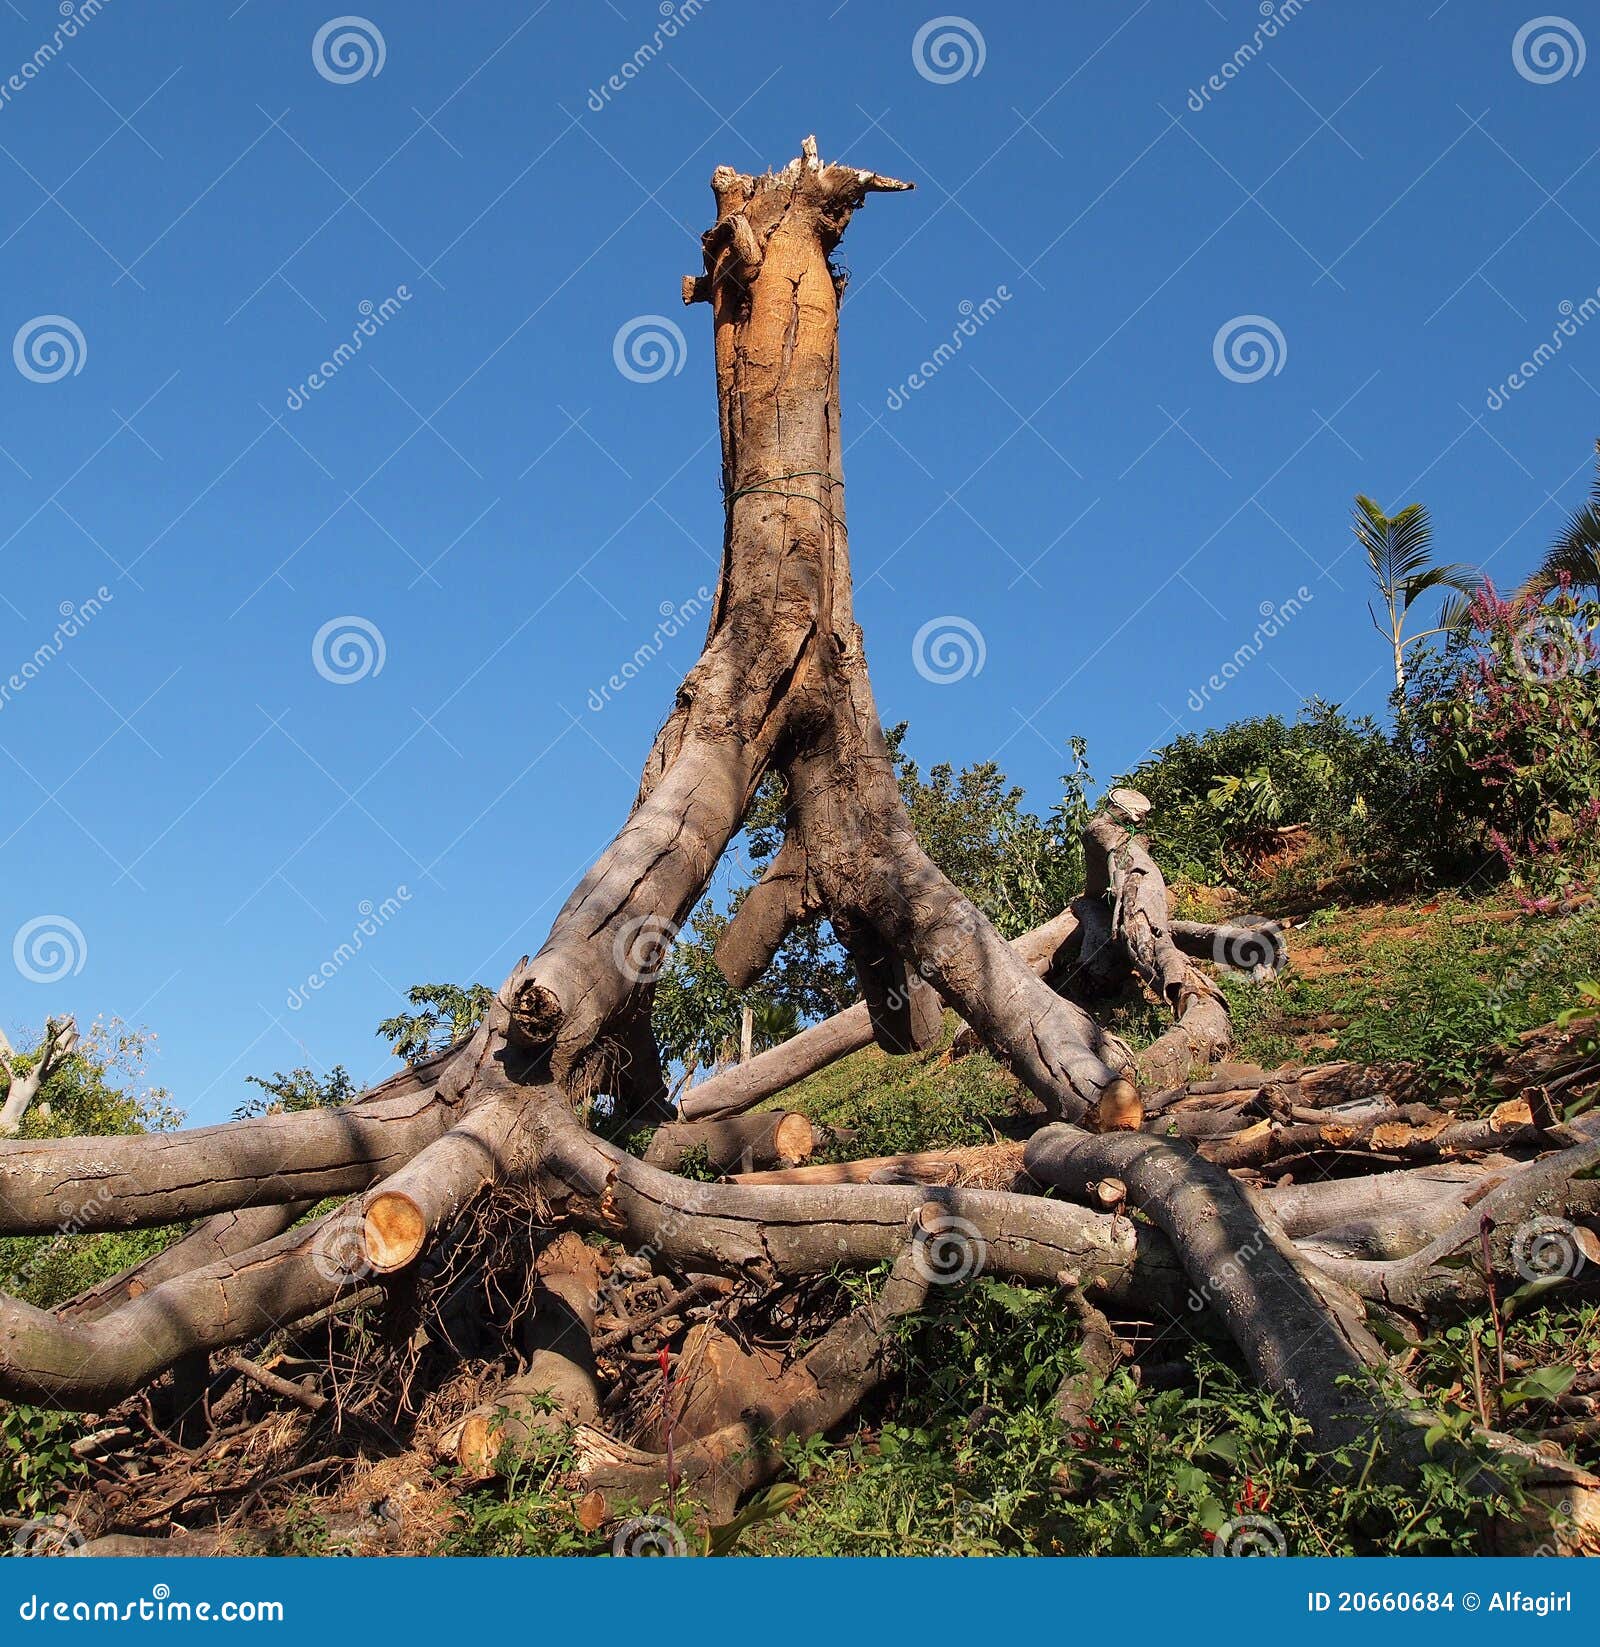 Uprooted Tree Stock Images - Image: 20660684